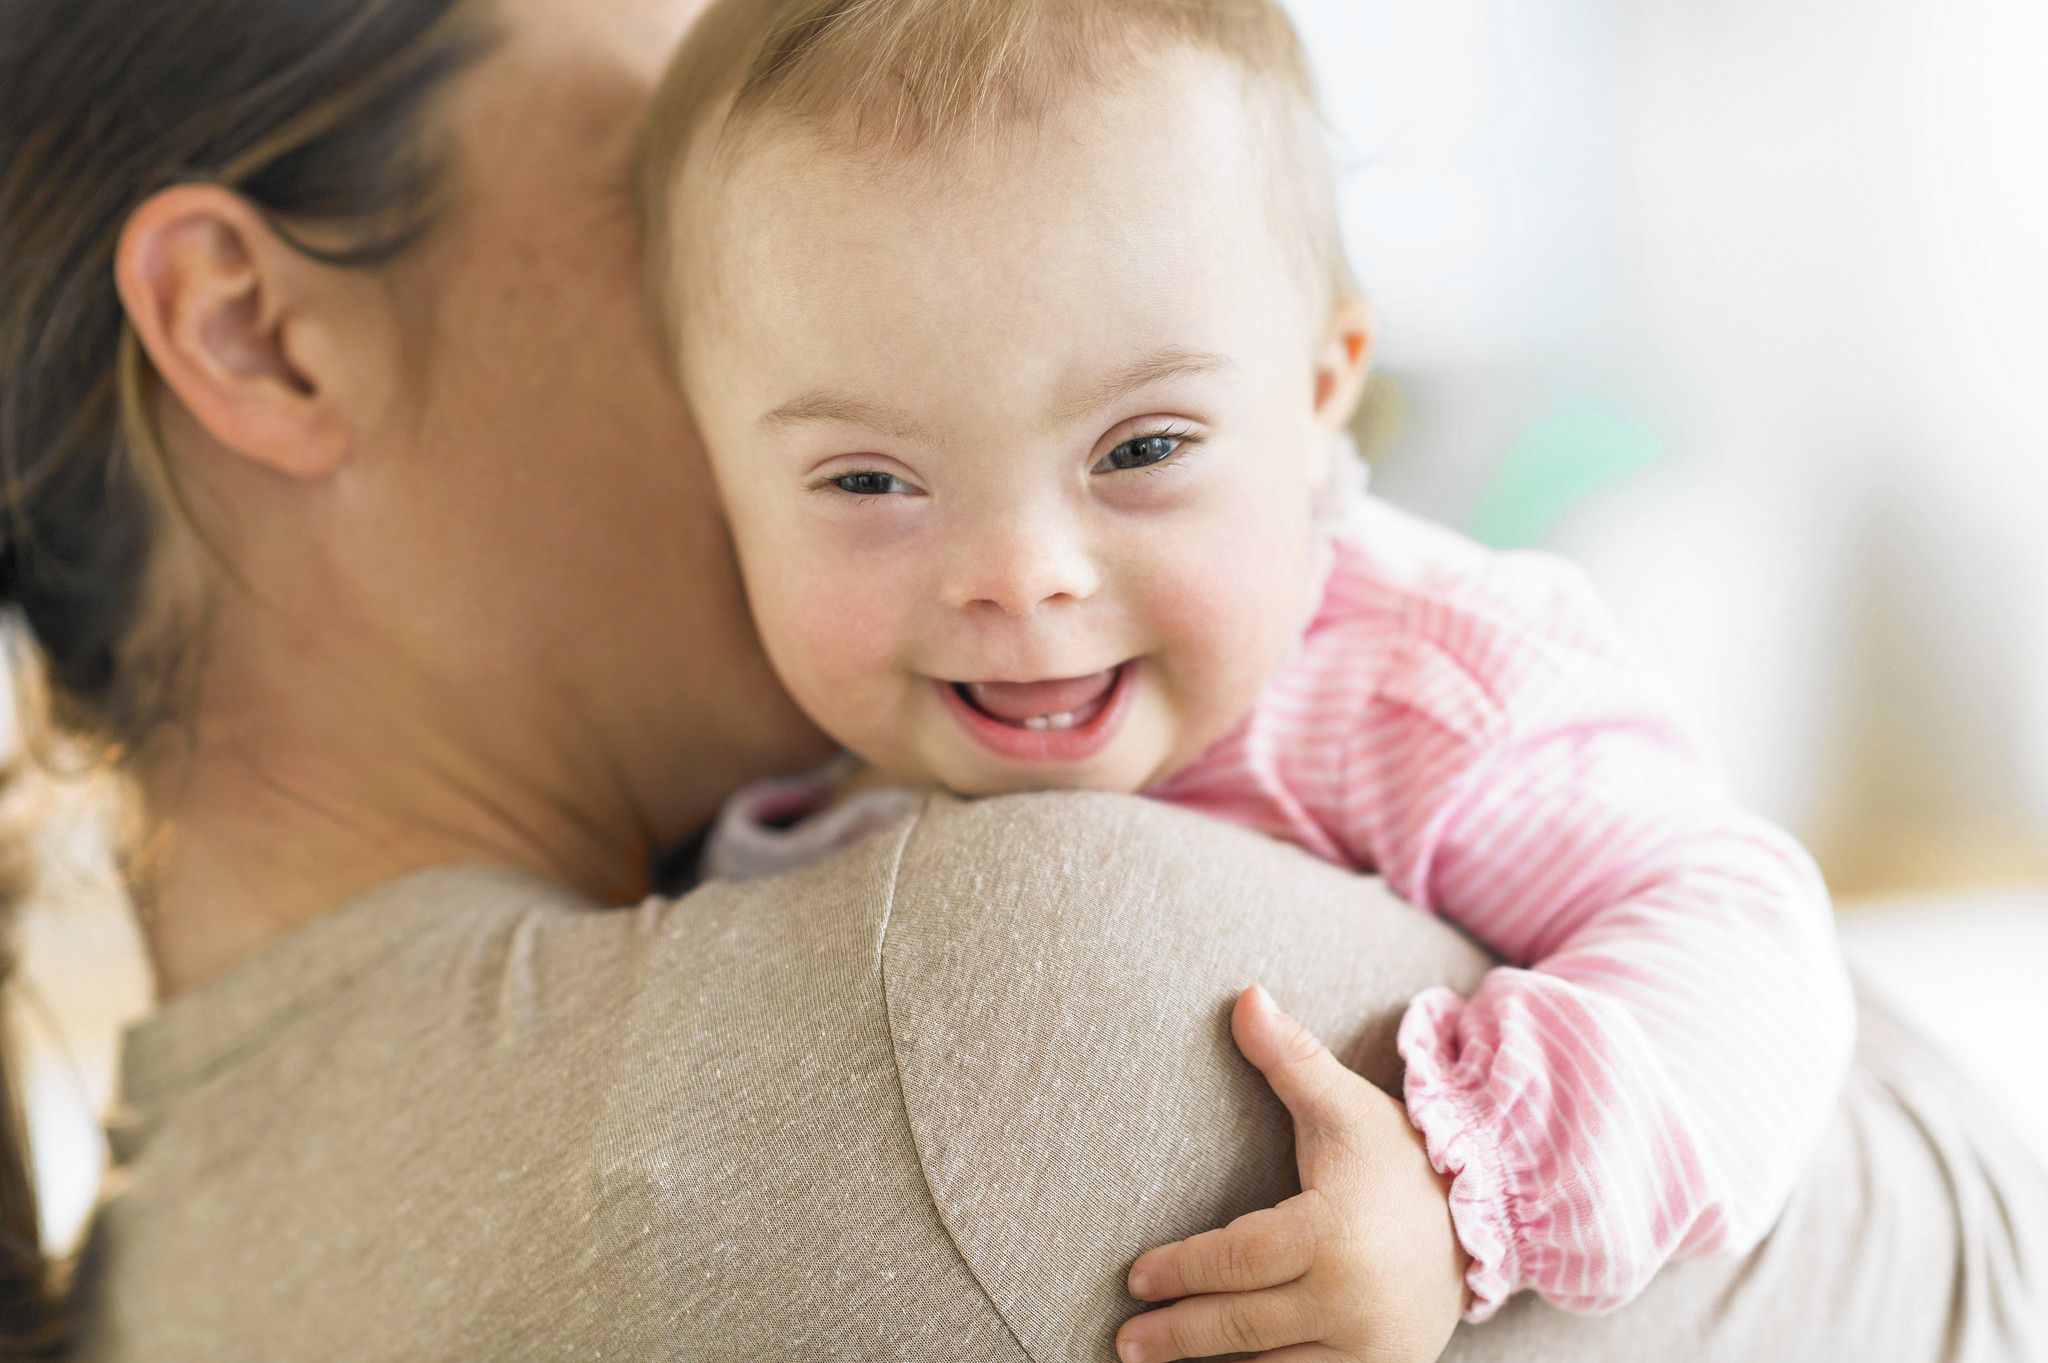 Children with Down Syndrome: Health Care Information for Families 